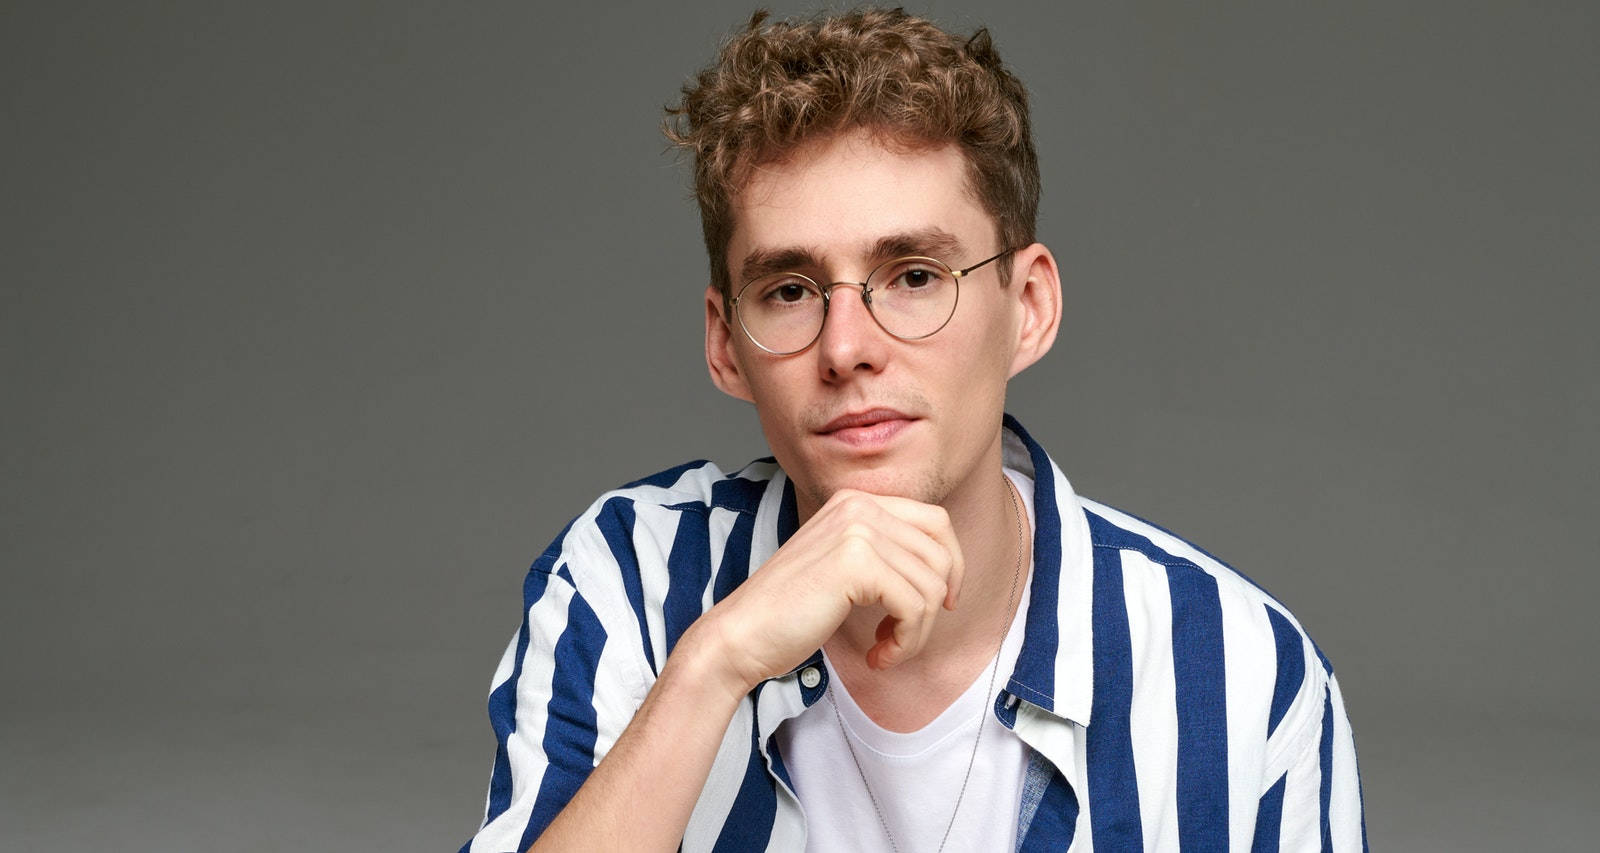 Lost Frequencies In Blue Stripes Wallpaper